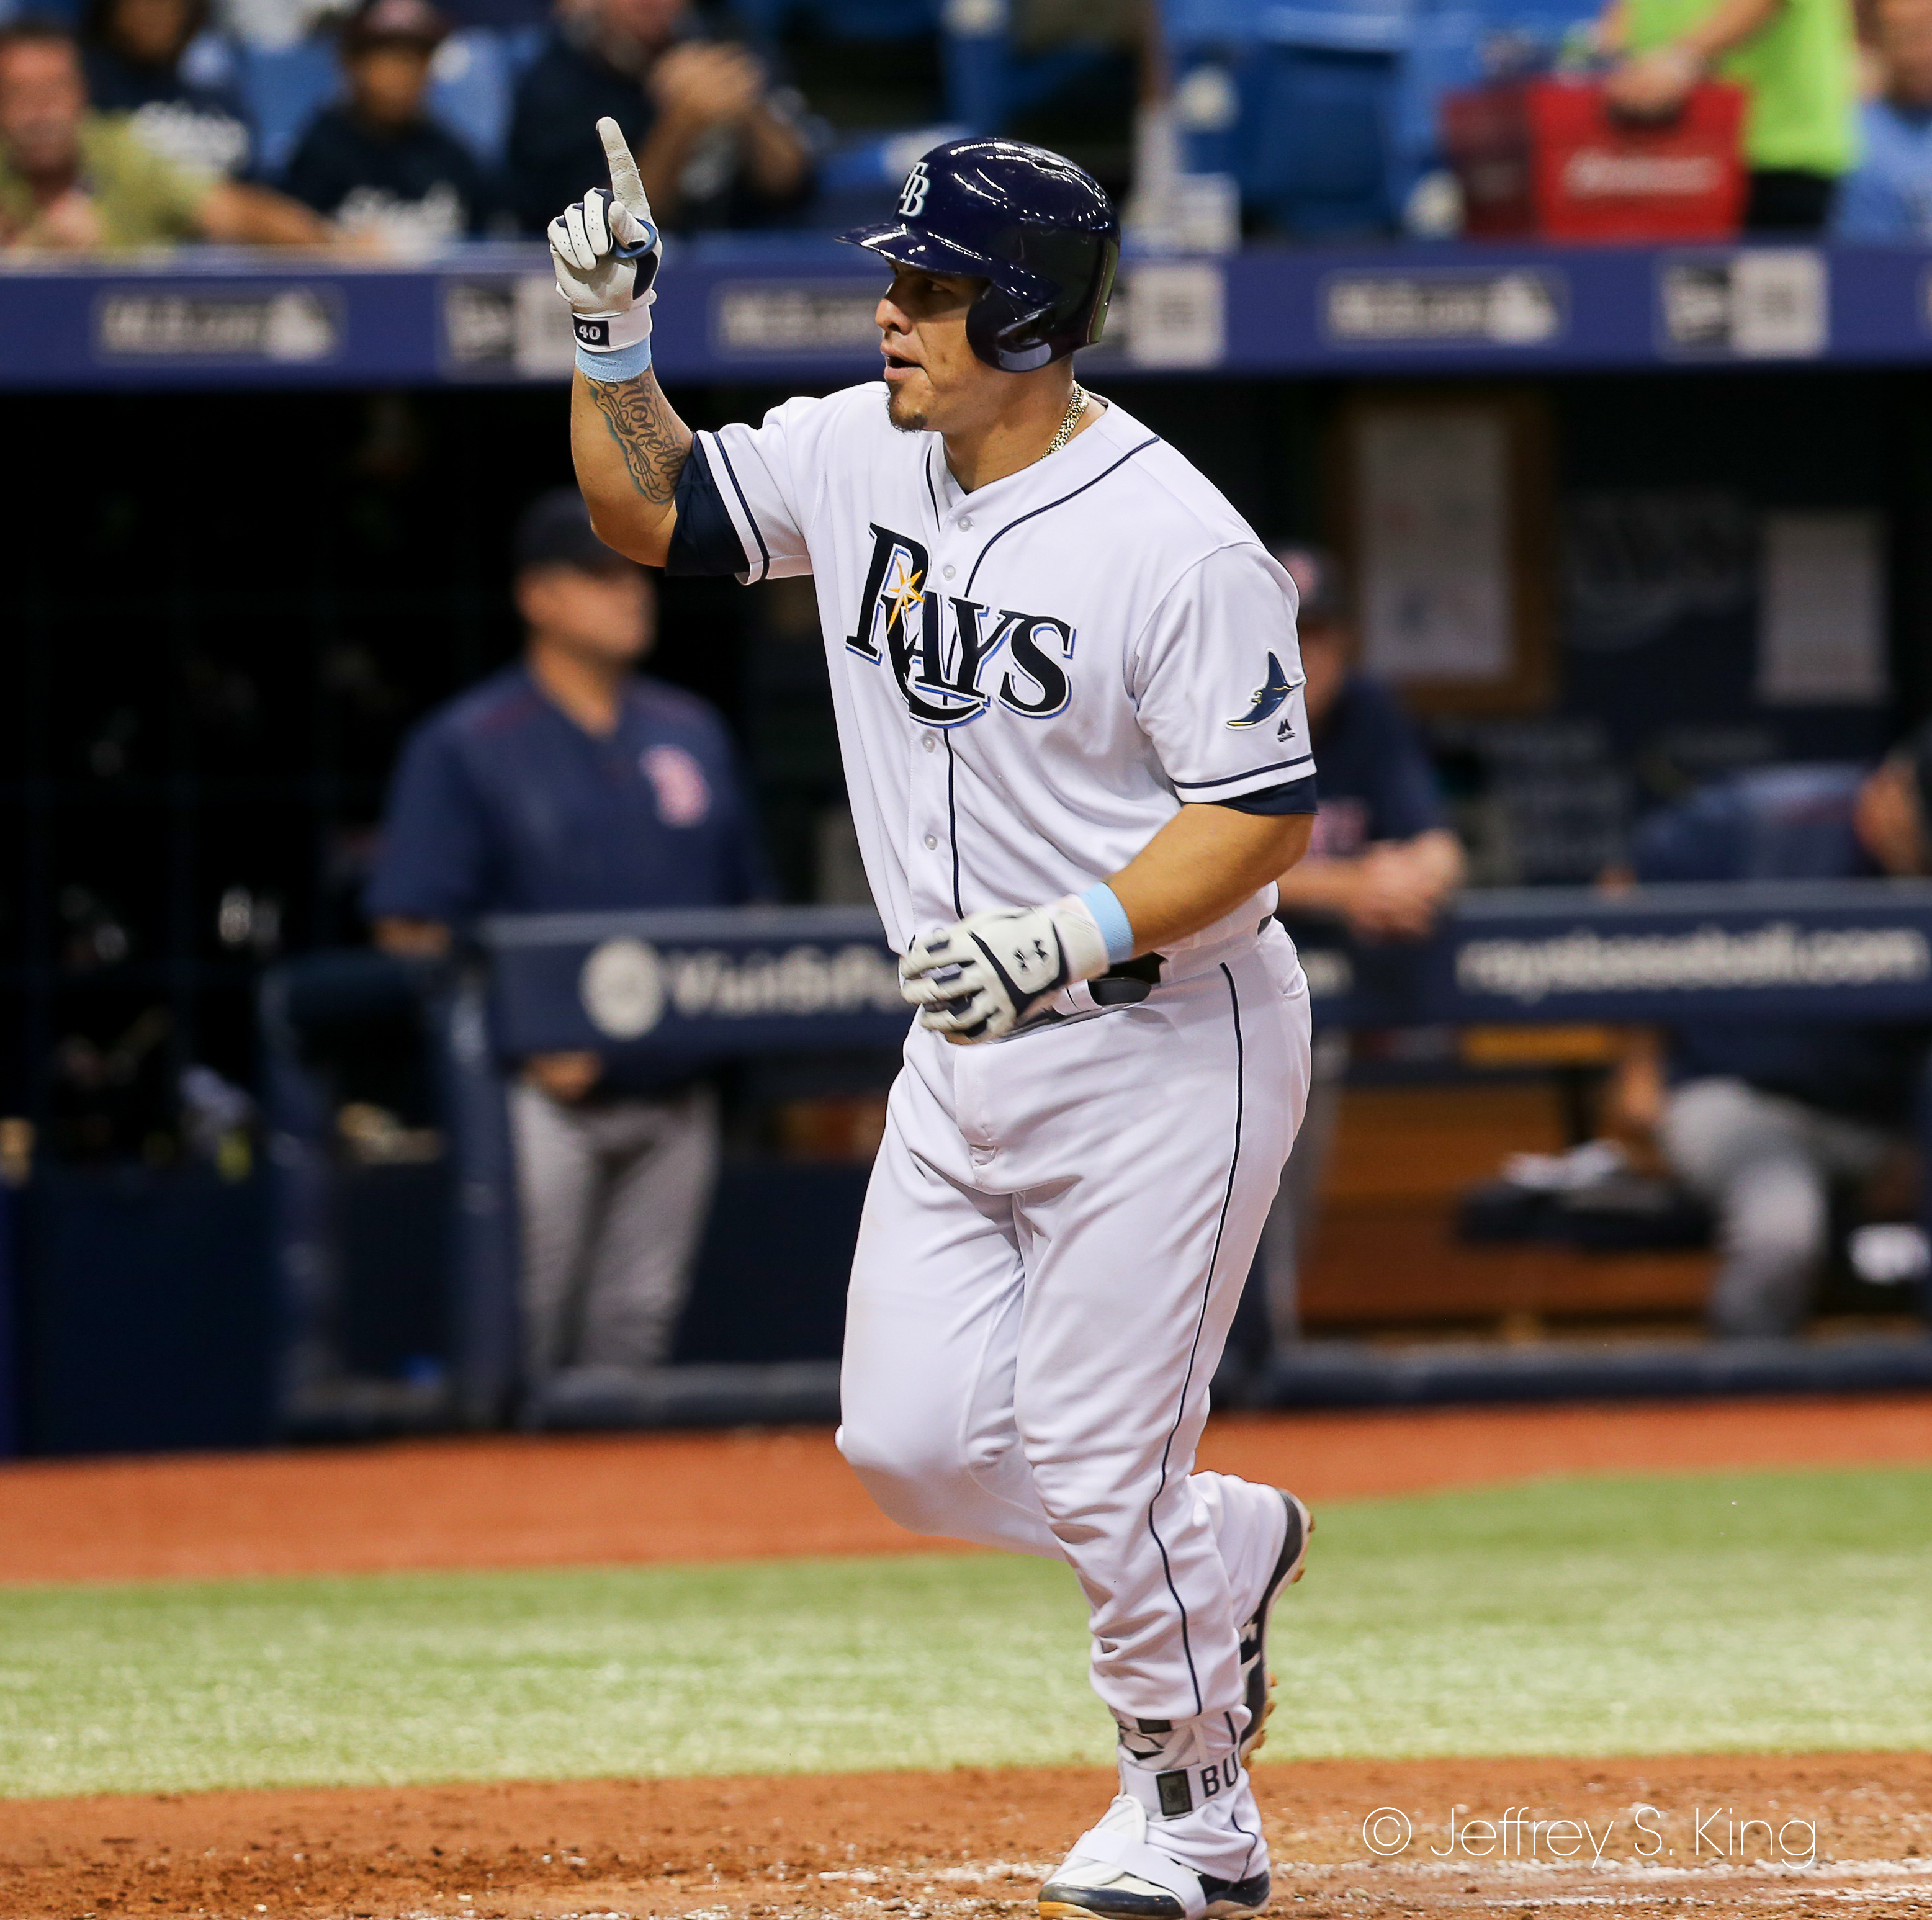 Ramos drove in the winning run for the Rays./JEFFREY S. KING